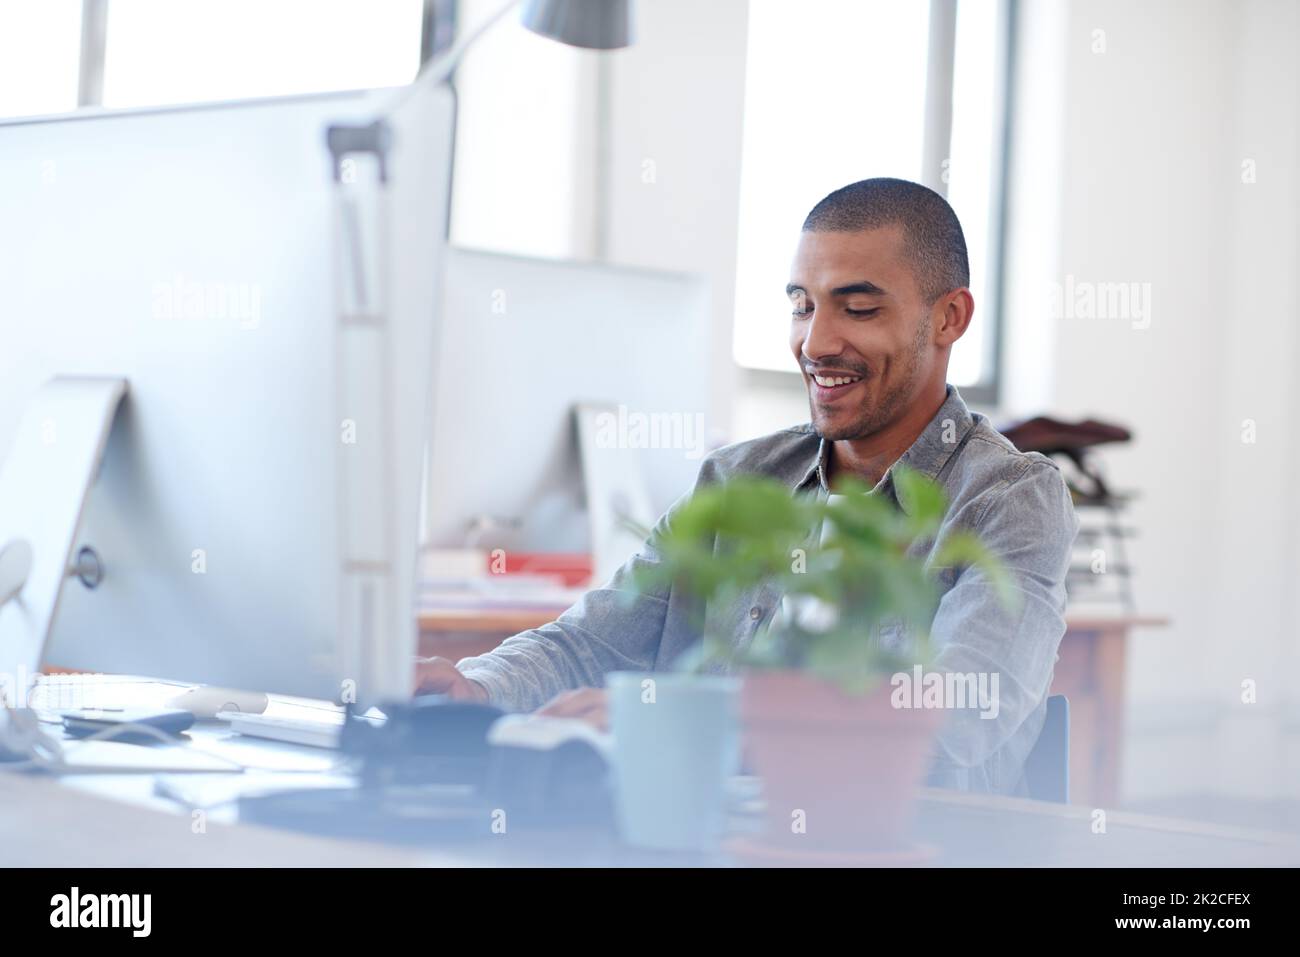 Feeling good about my profession. Young multi-ethnic man at work in a bright office space. Stock Photo